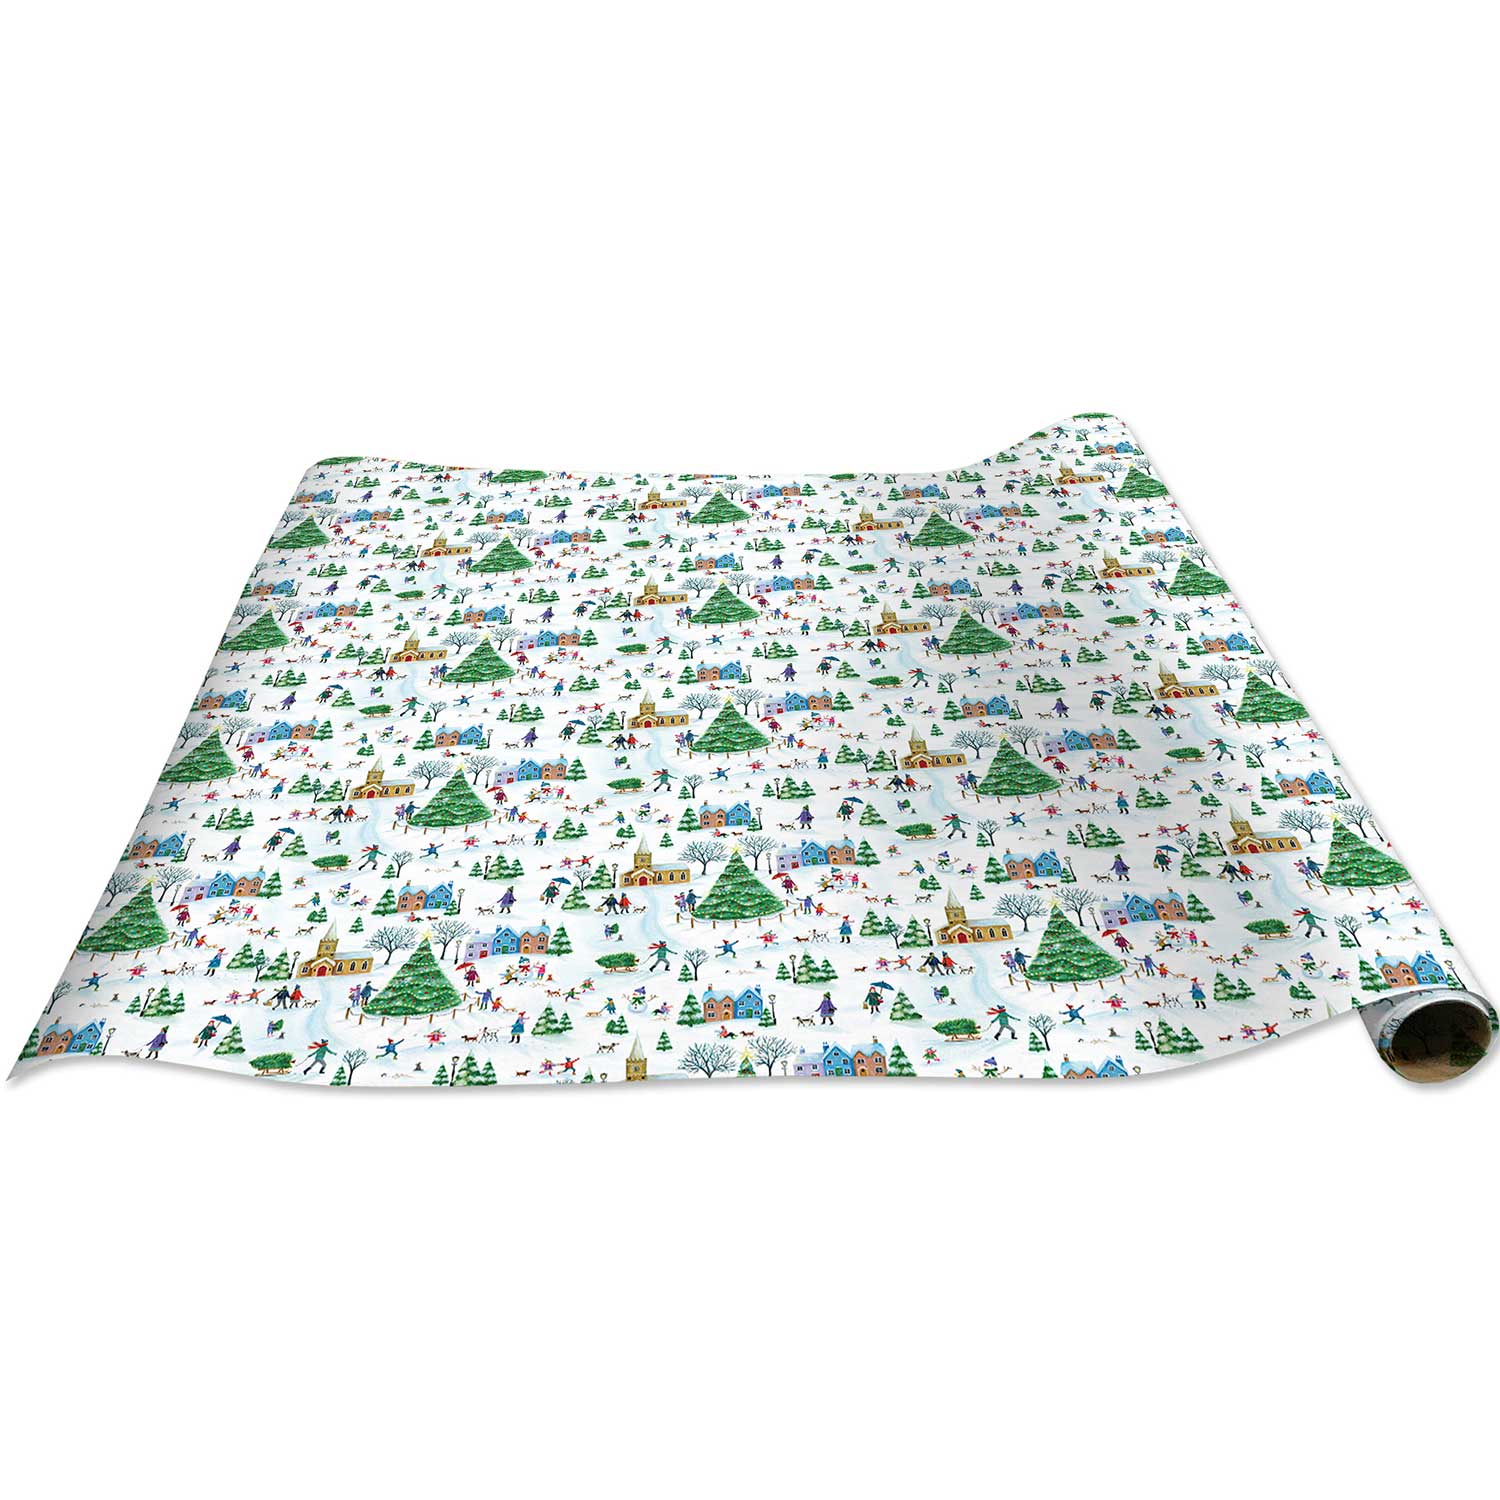 Village Town Christmas Gift Wrap Full Ream 833 ft x 24 in